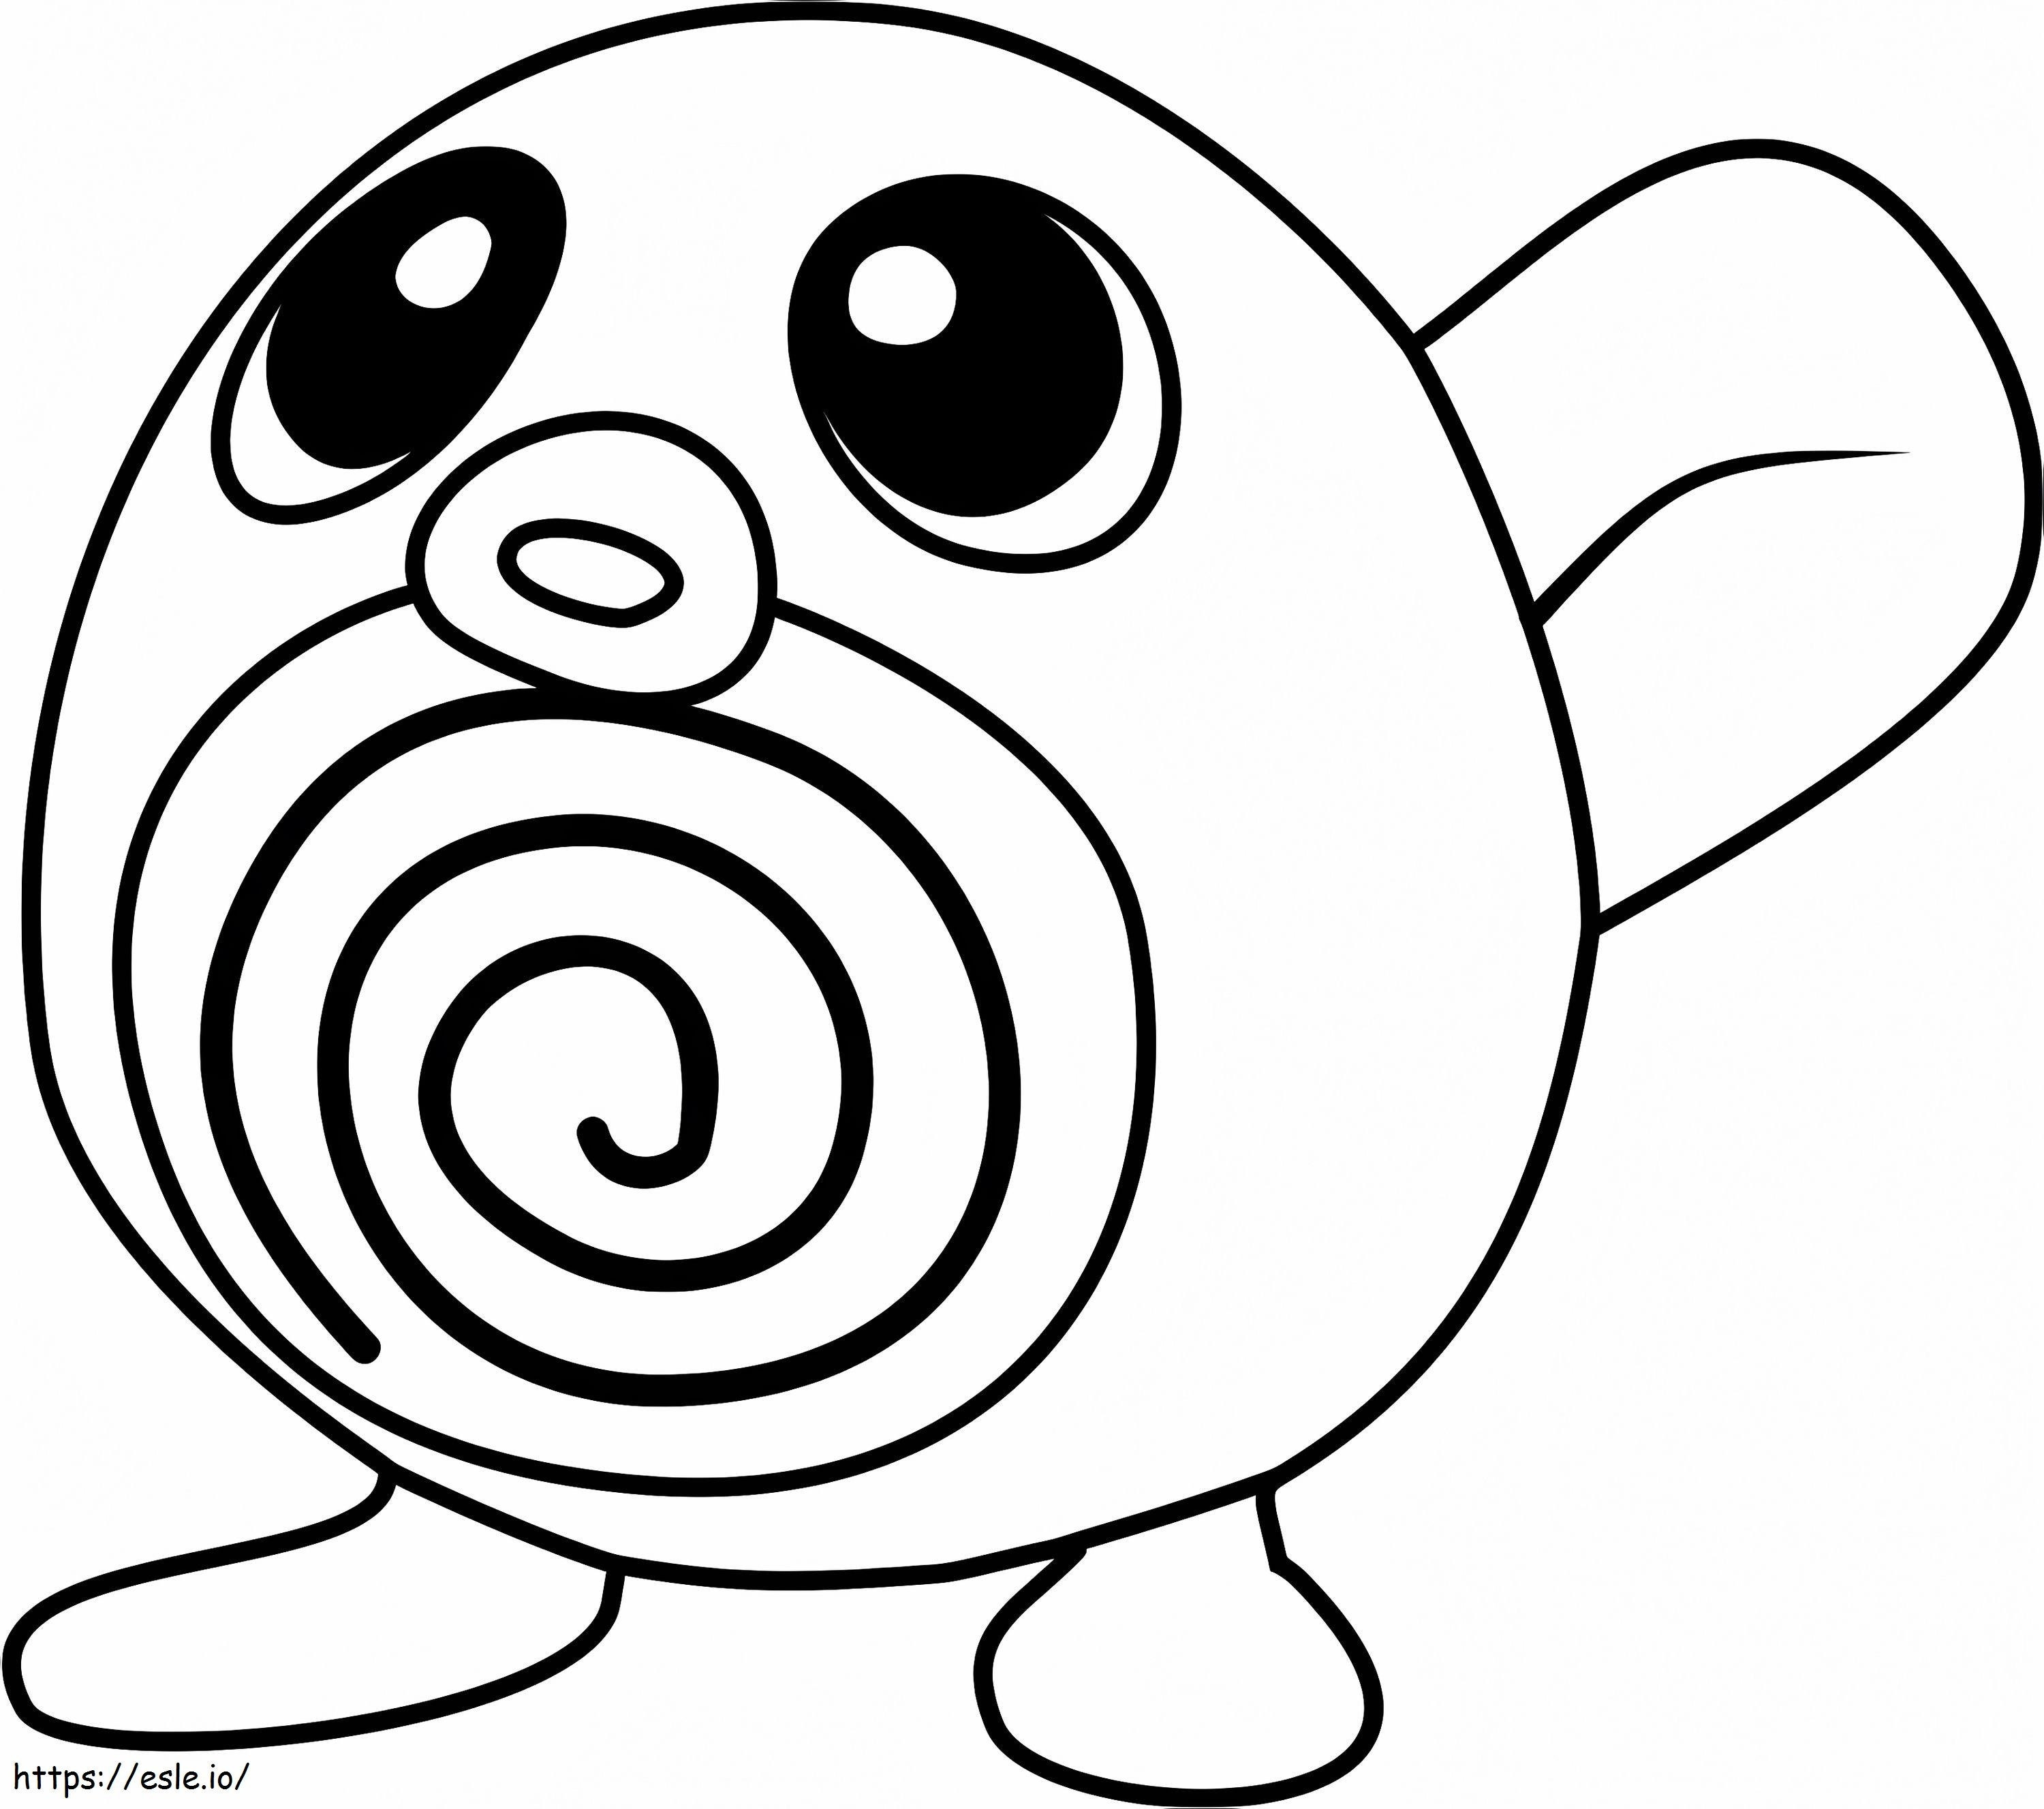 1530845689 Poliwag Pokemon Go A4 coloring page